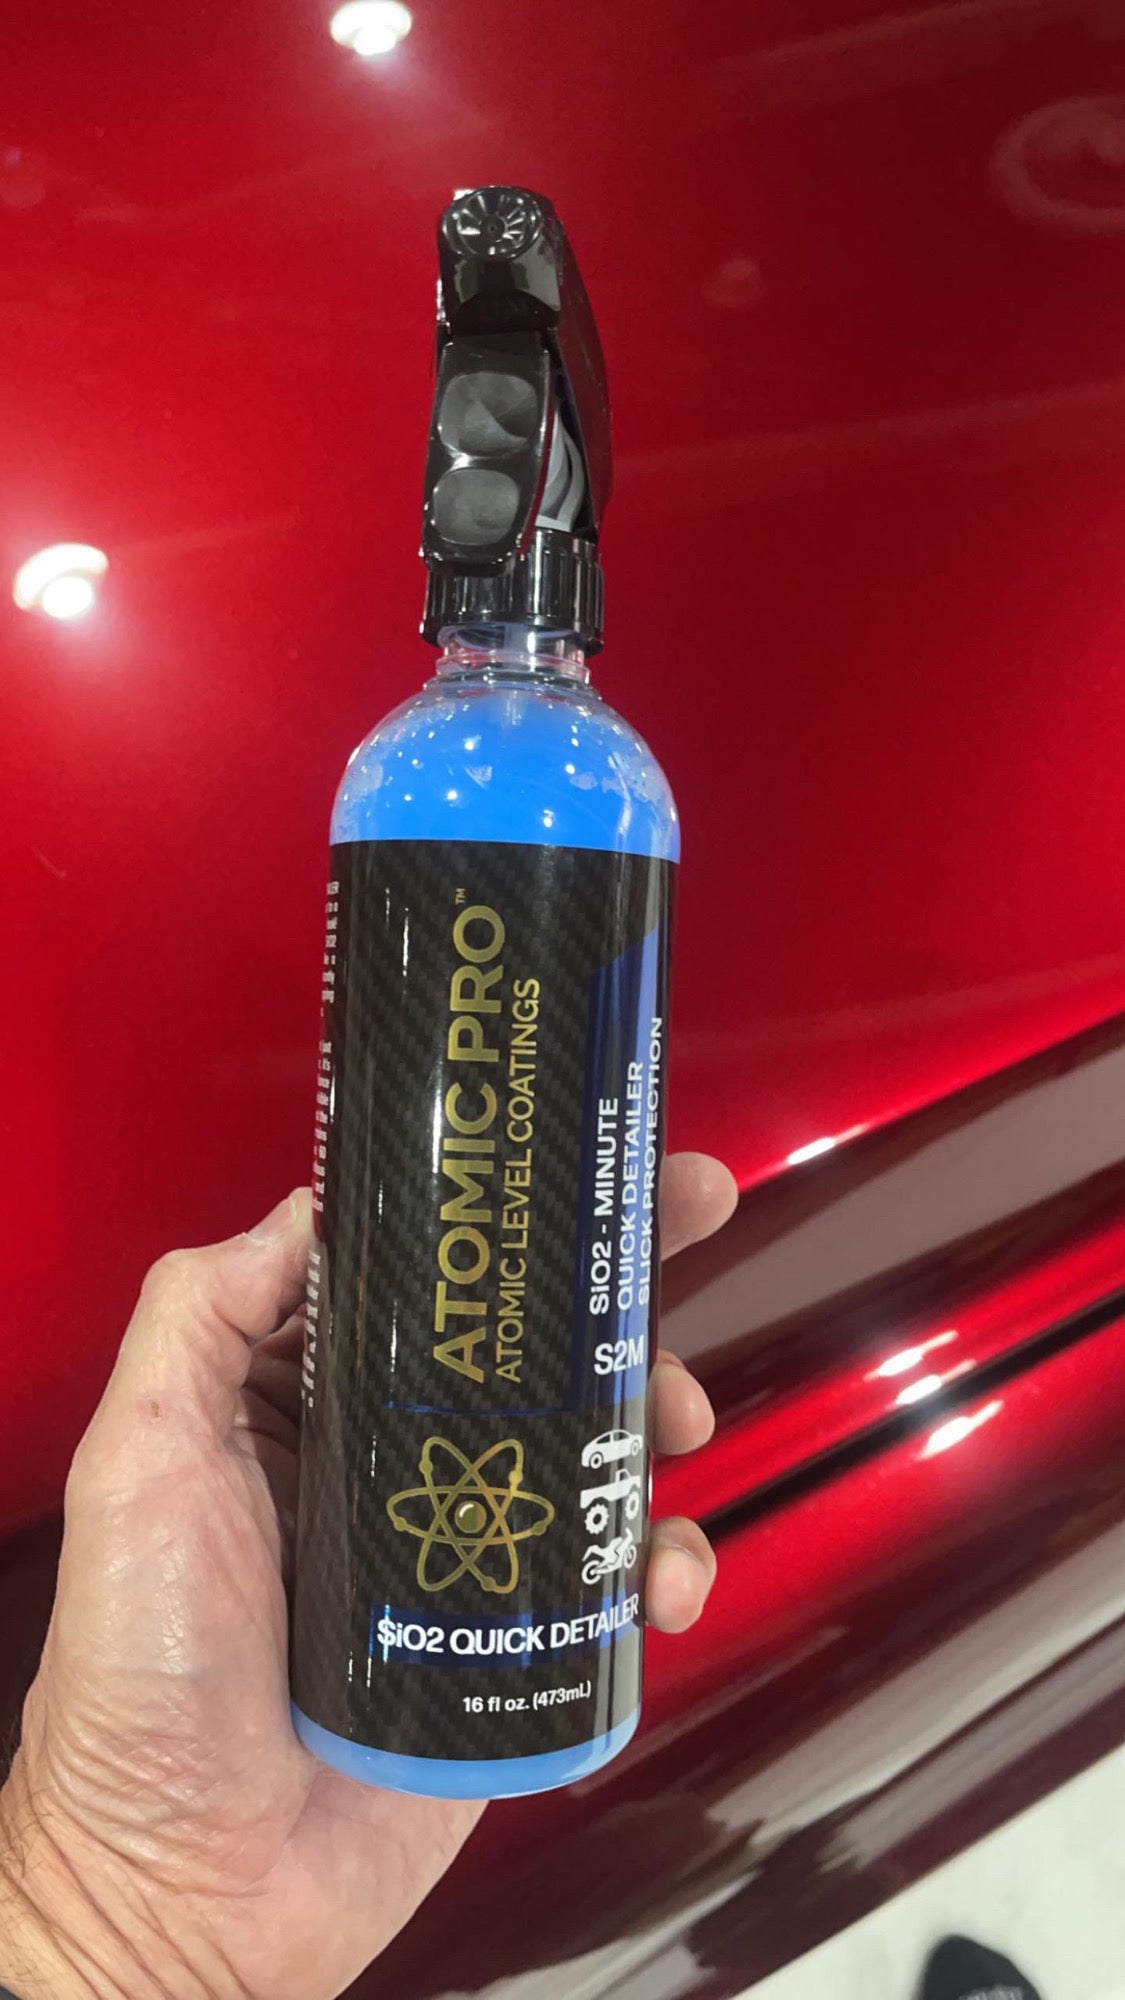 ATOMIC PRO SiO2 Minute quick detailer is our top selling quick detailer